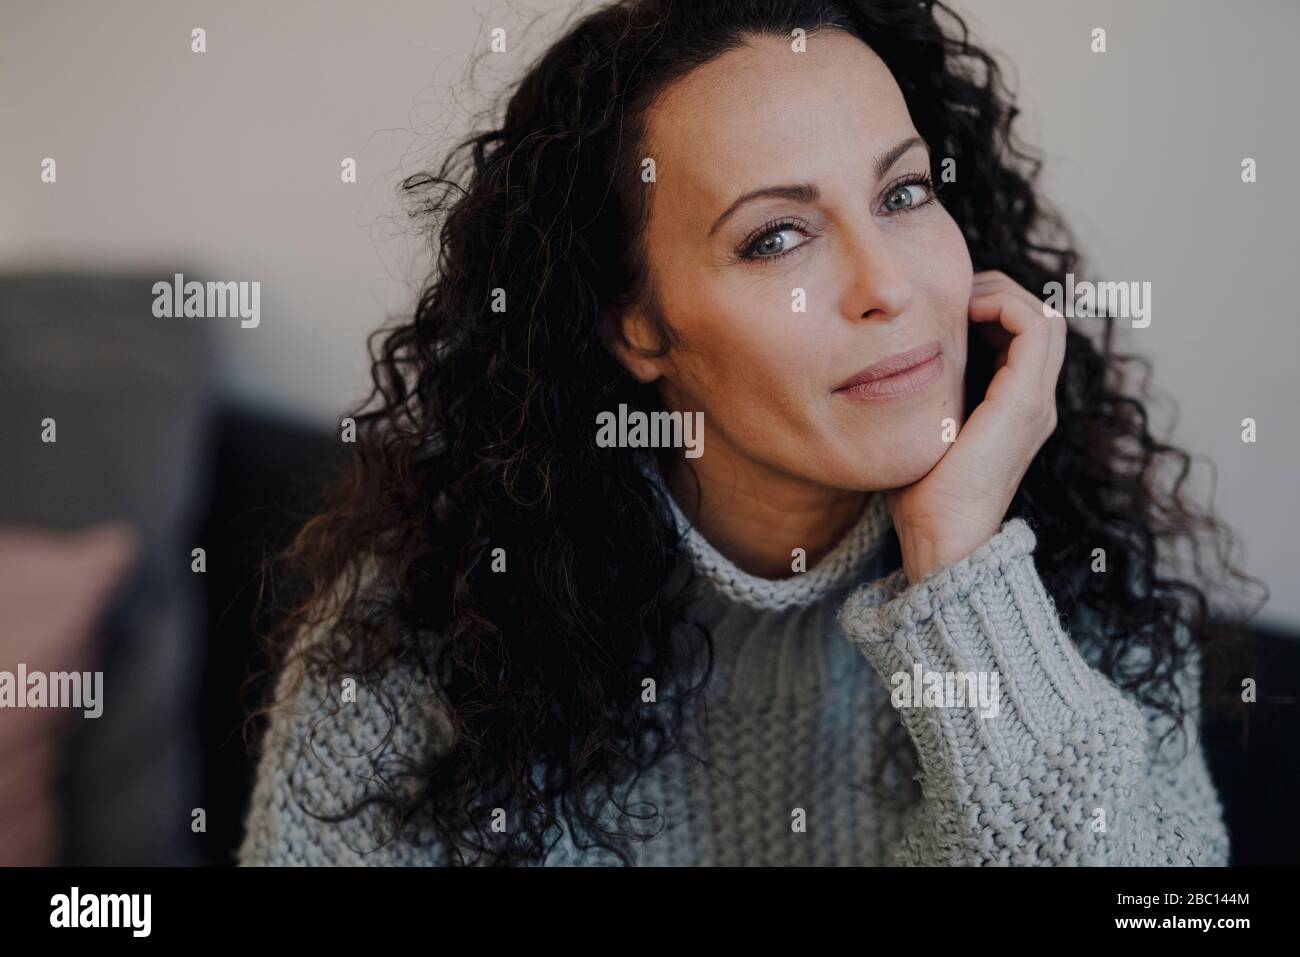 Portrait of a beatiful woman, with chin in hand Stock Photo